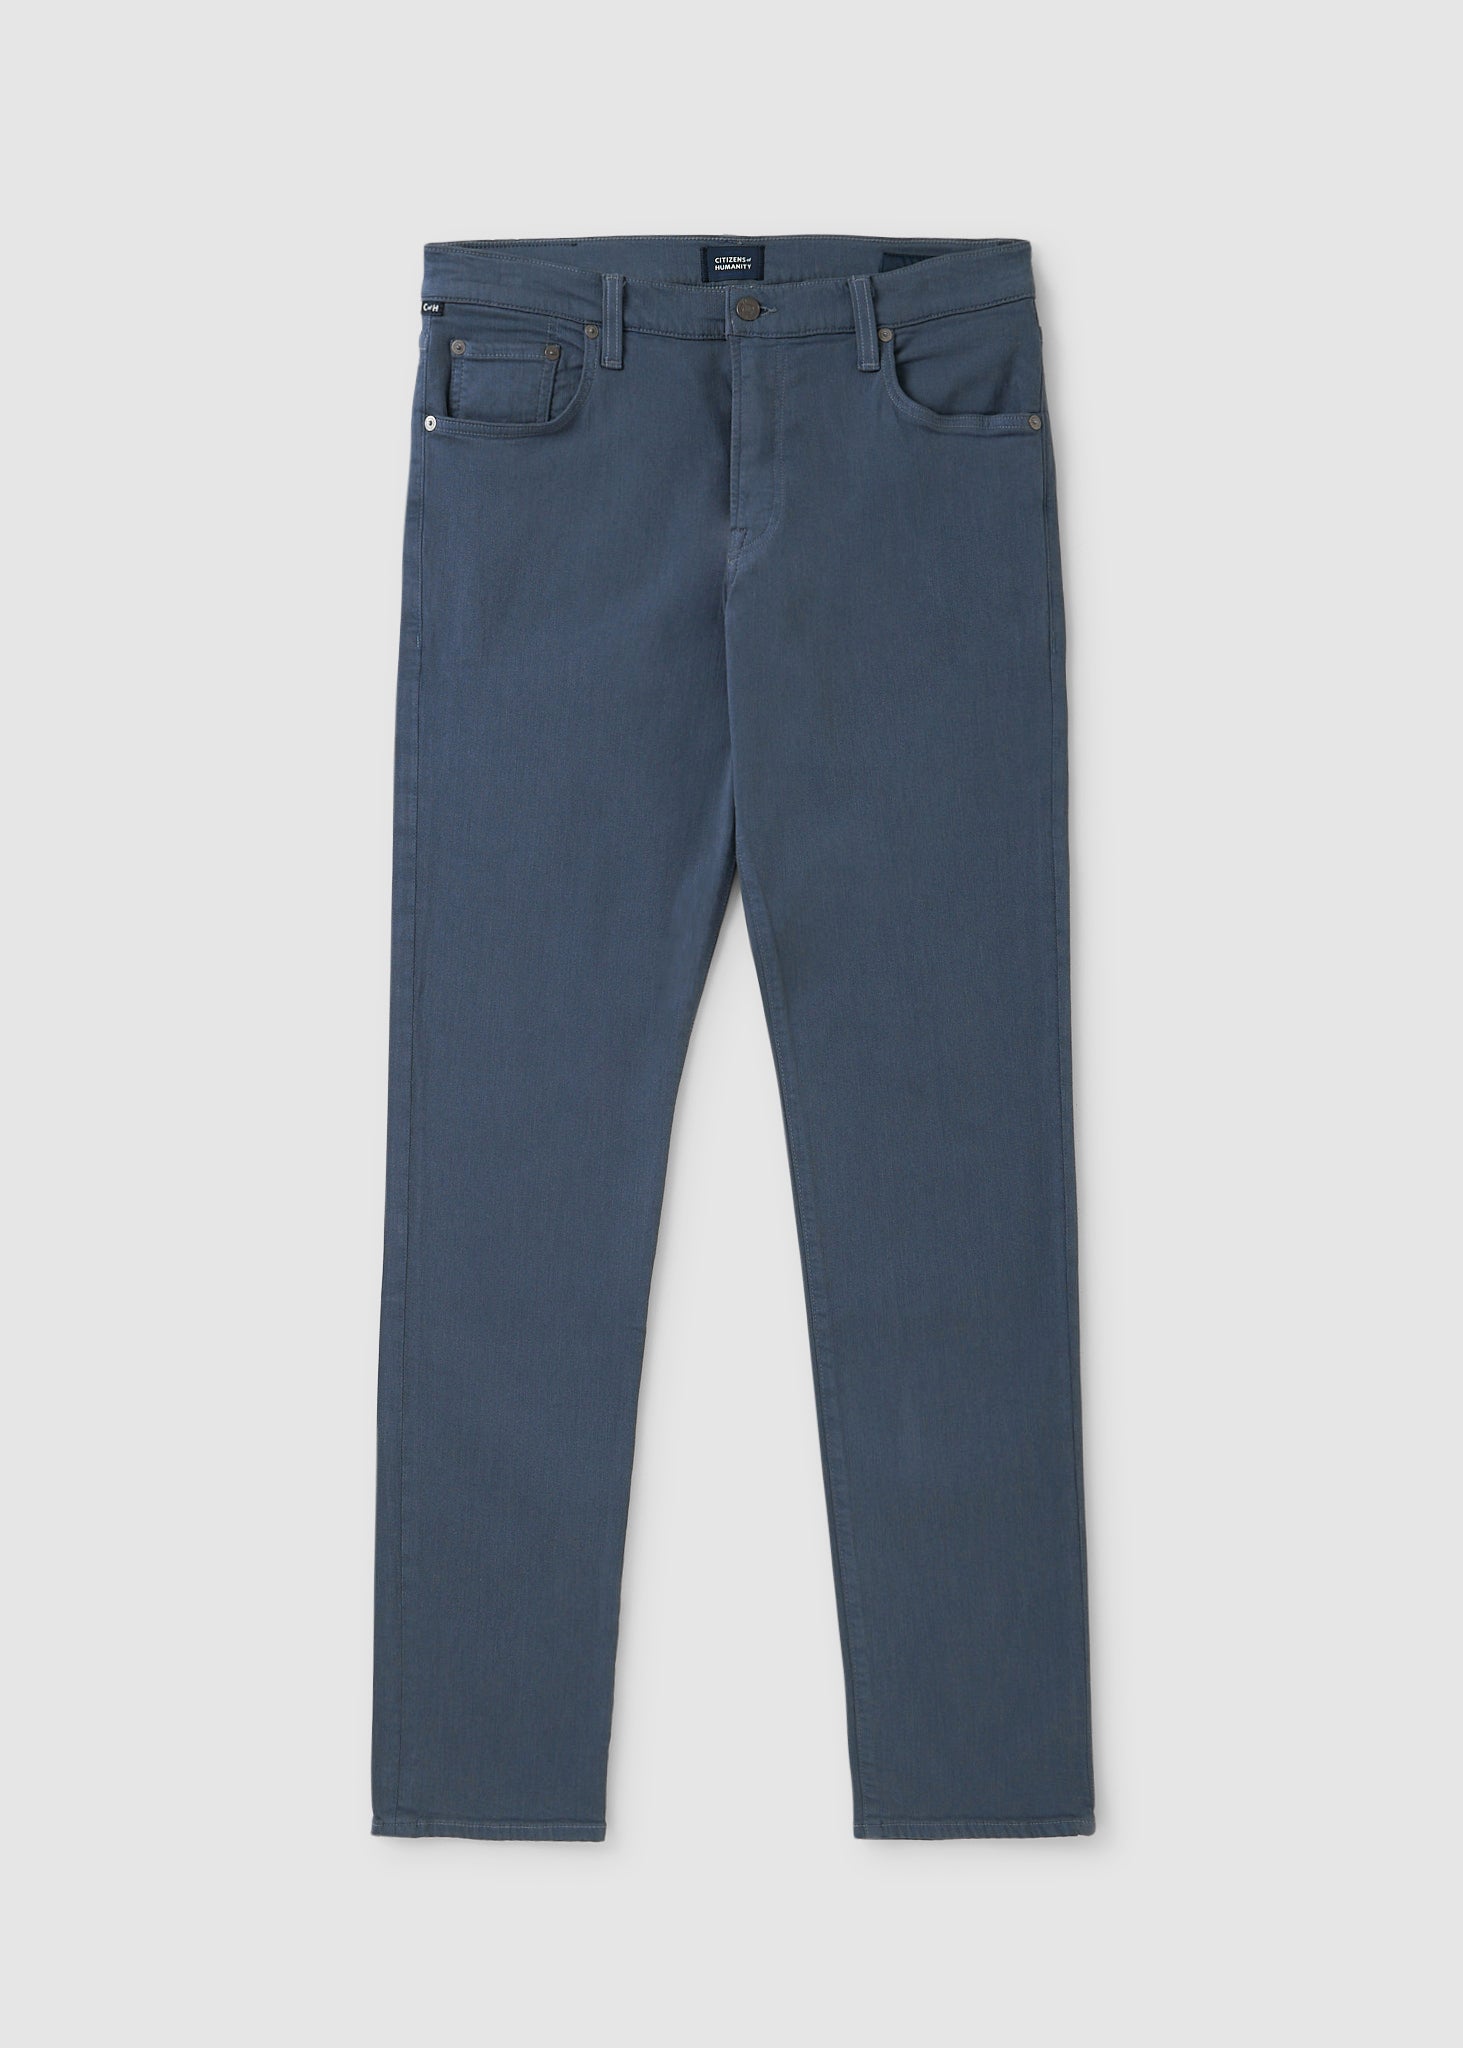 Image of Citizens Of Humanity Mens Adler Stretch Twill Jeans In Sentry